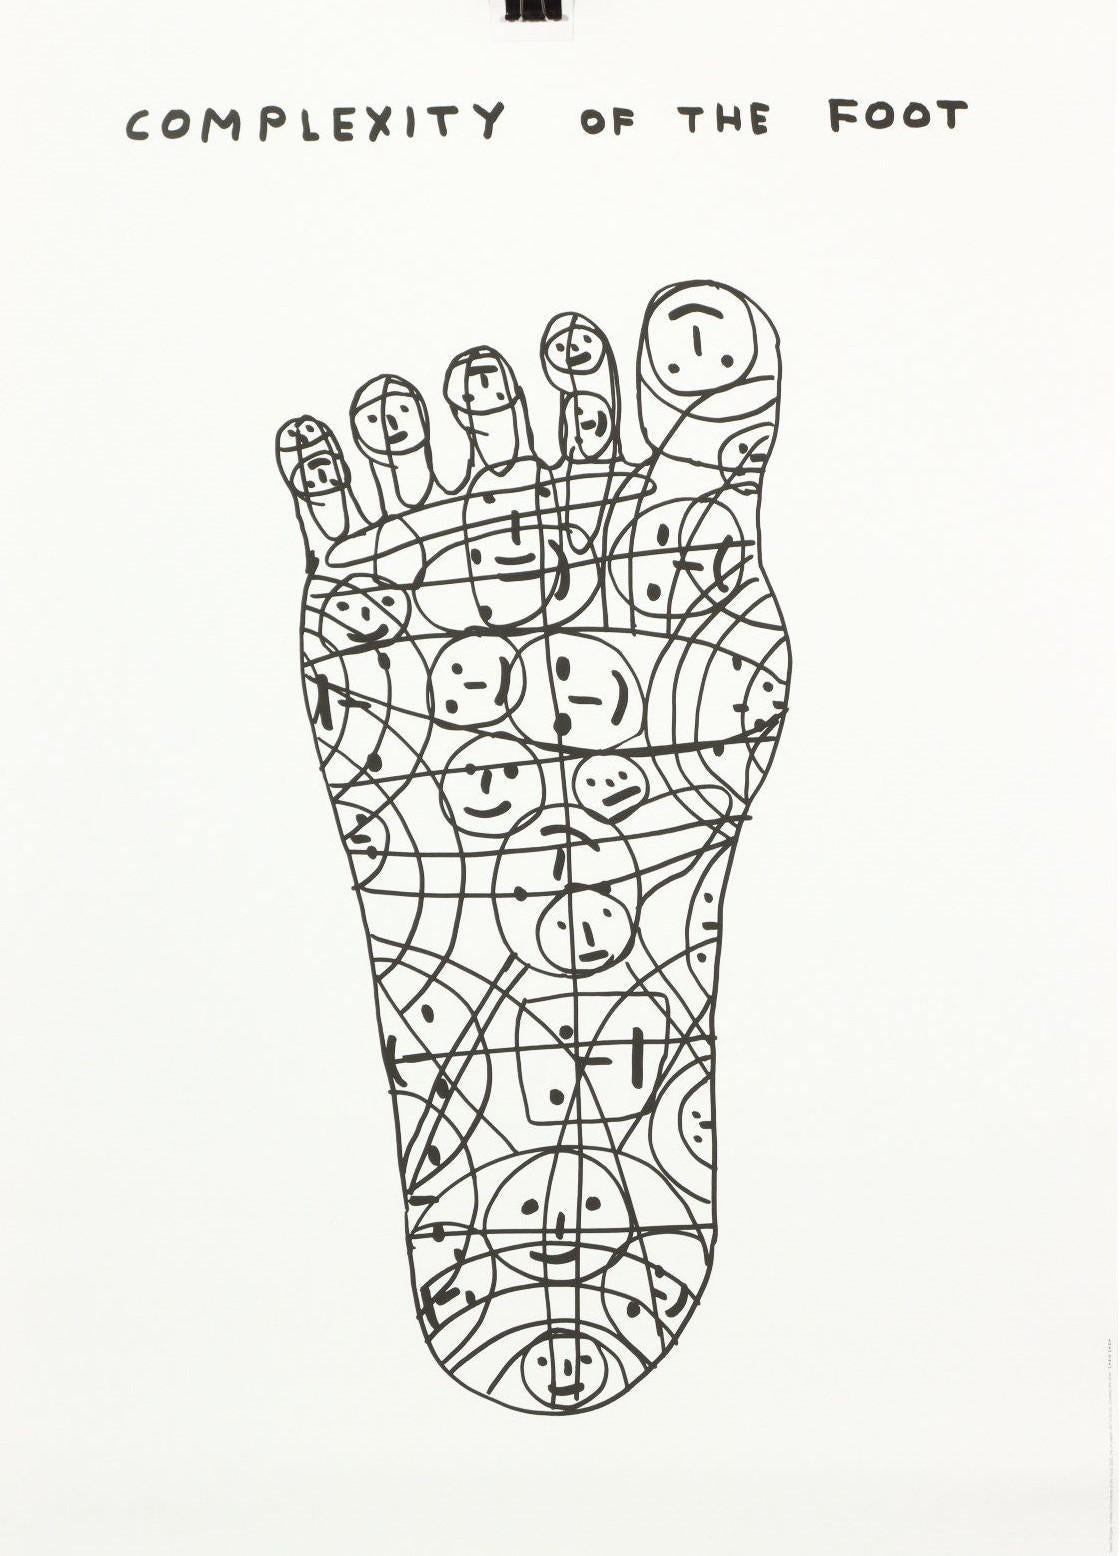 David Shrigley -- Complexity of the Foot, 2023
70 x 50 cm
It is created from the unique work: Untitled (Complexity of the Foot) (2020)
Printed on 200g Munken Lynx paper
Printed by Narayana Press in Denmark
Unnumbered from the Edition of 350
Unsigned